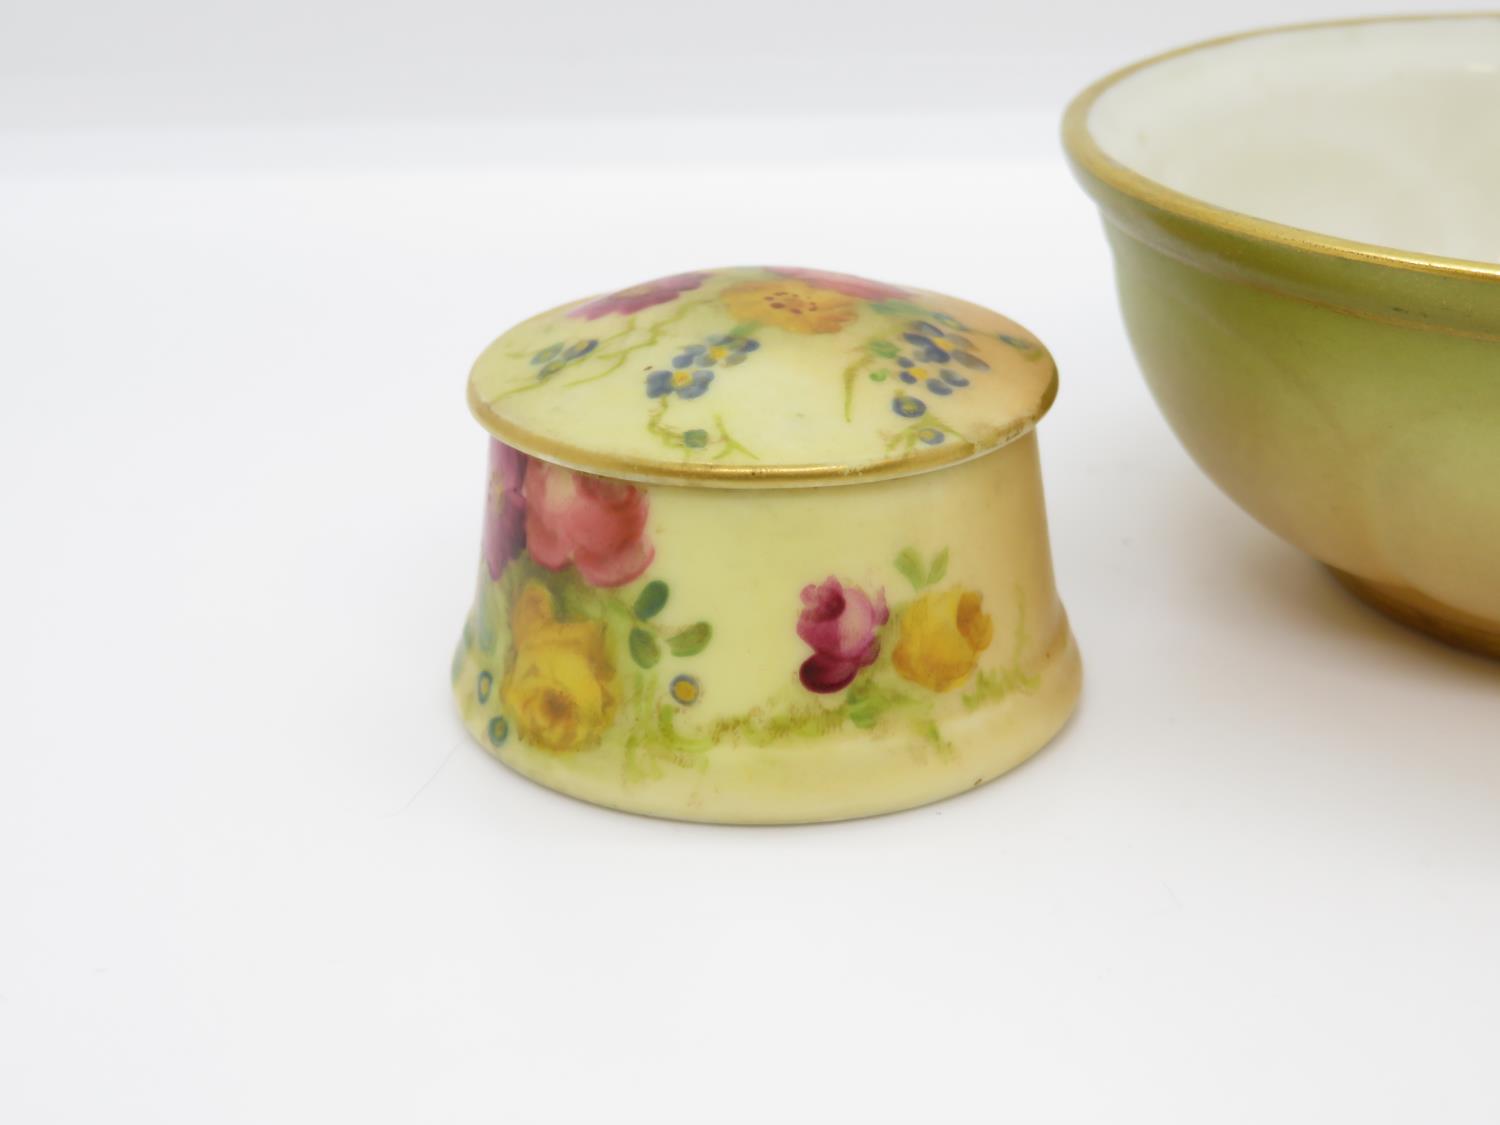 Royal Worcester G89 pattern bowl 3.5" dia. along with miniature Royal Worcester pot 1" high with lid - Image 2 of 5